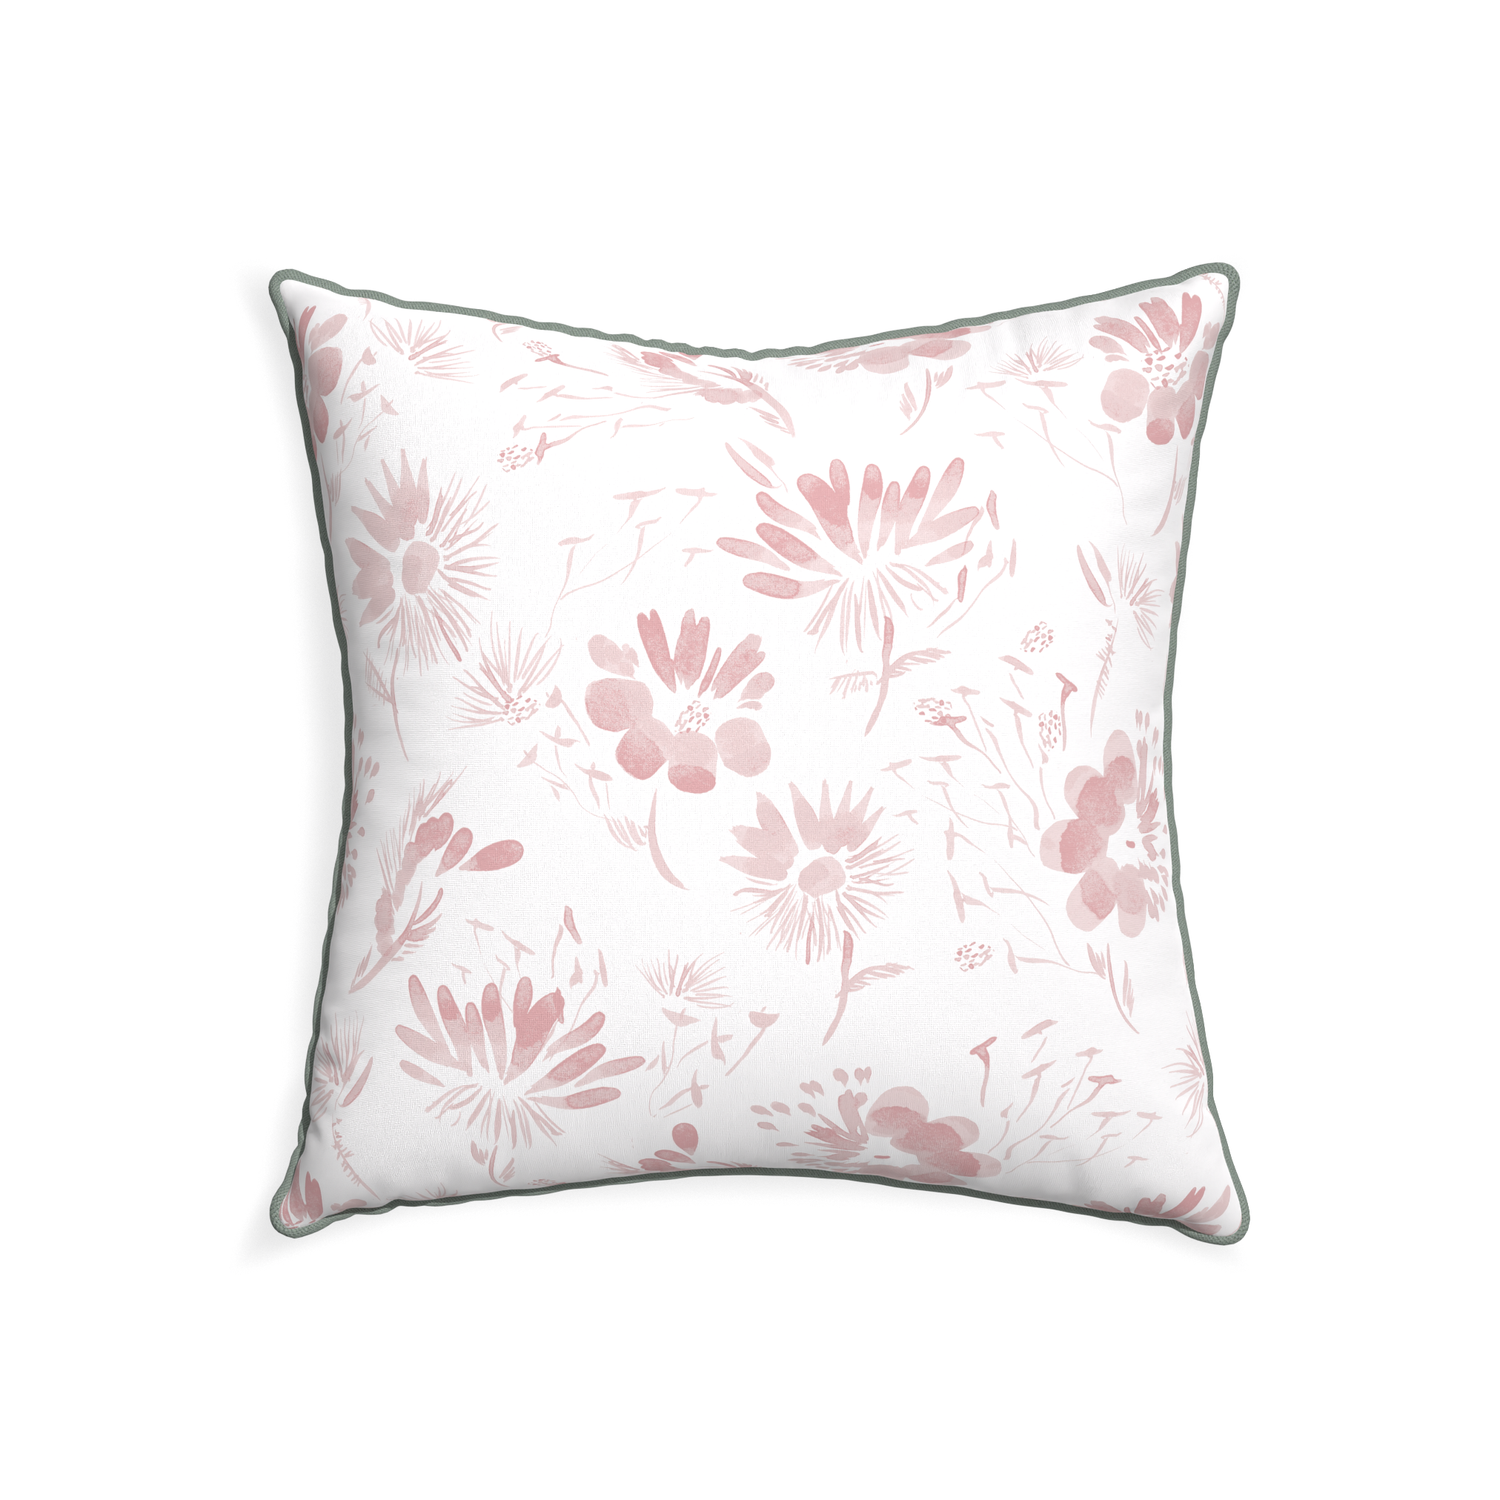 22-square blake custom pink floralpillow with sage piping on white background